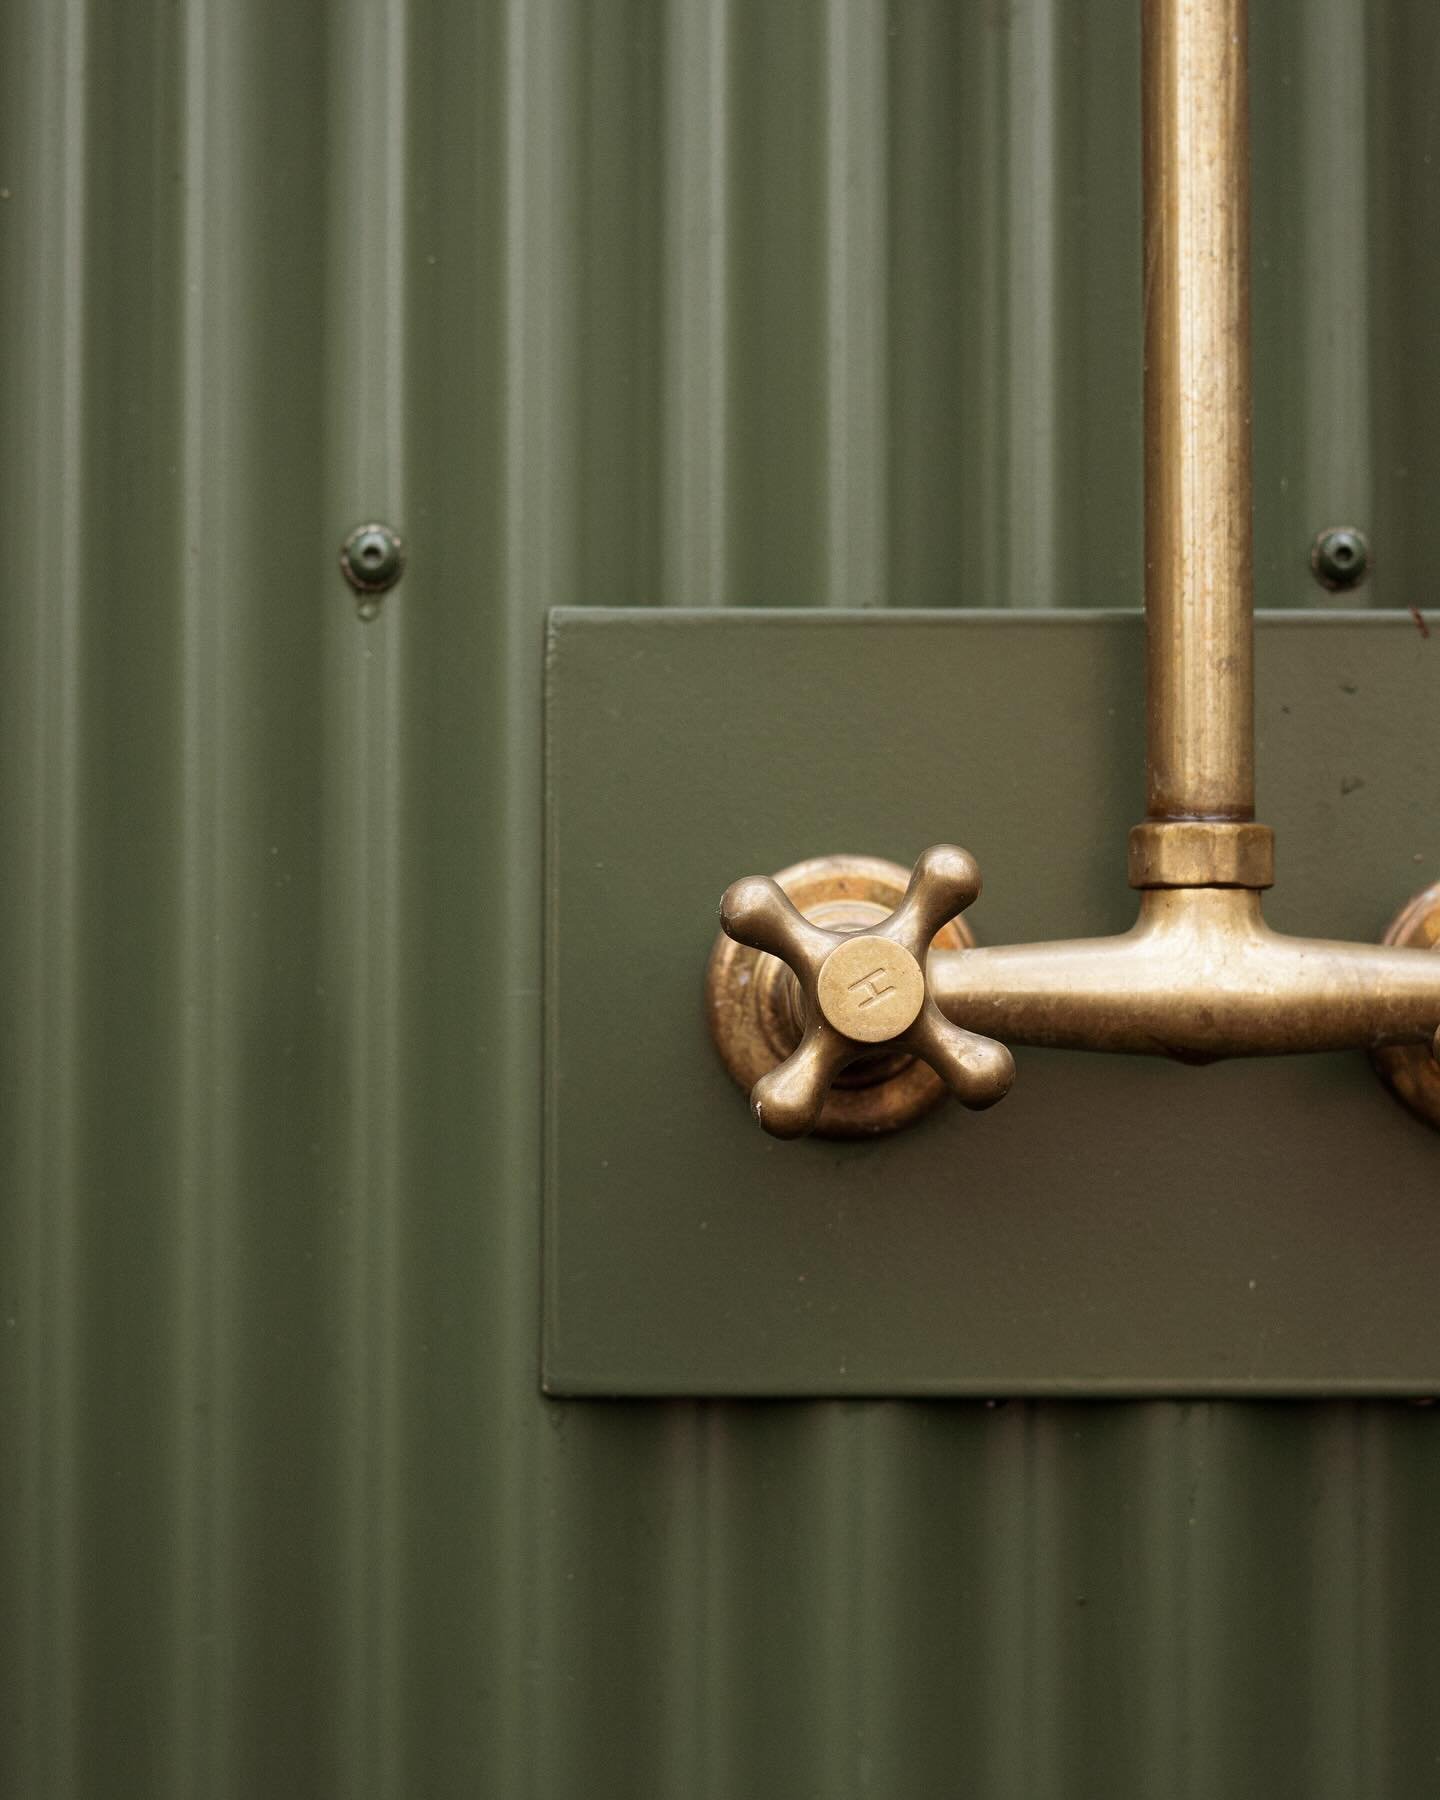 We can incorporate a loo, shower and/or kitchen  into your design. We offer conventional solutions which can be connected to the main sewer or off-grid solutions such as composting loos. For any kind of plumbing, planning permission is required and a